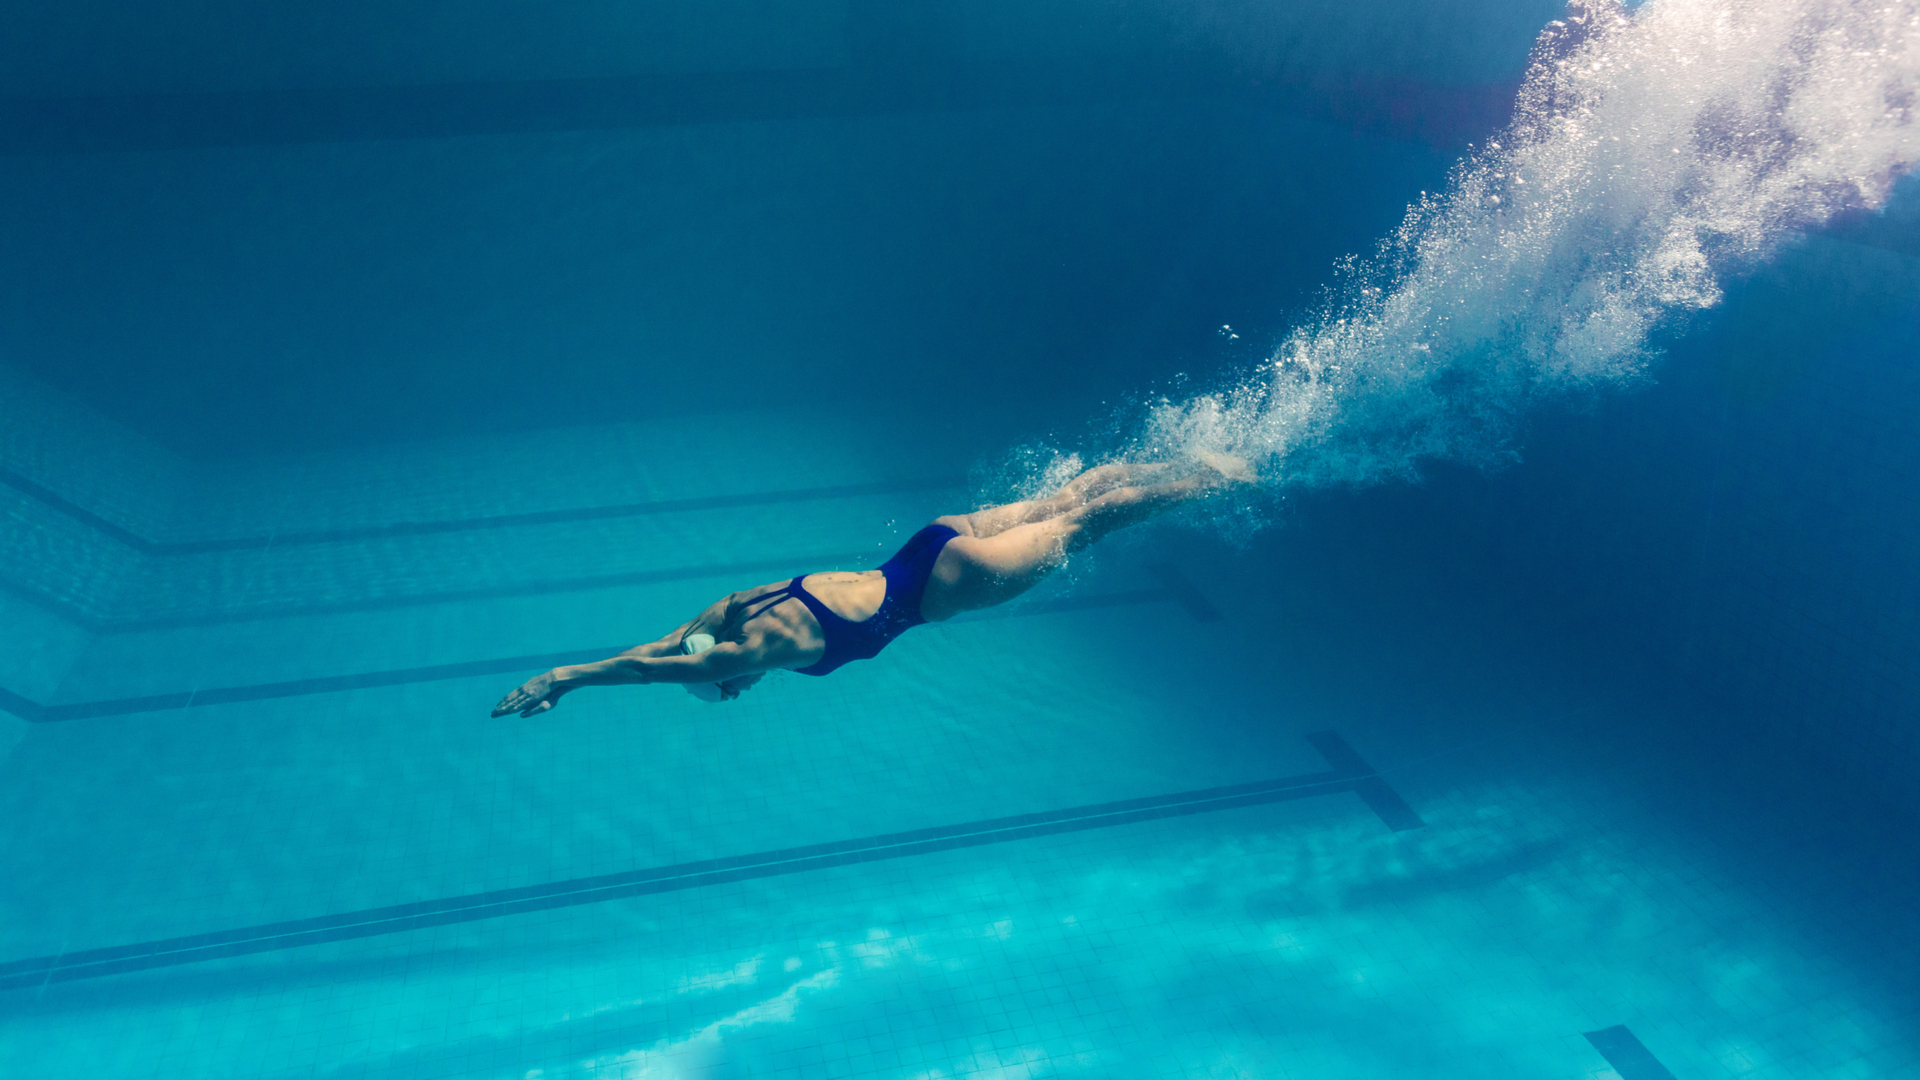 Underwater snapshot of woman alone after diving into the deep end of a pool. Symbolizes being a solo-founder in business.